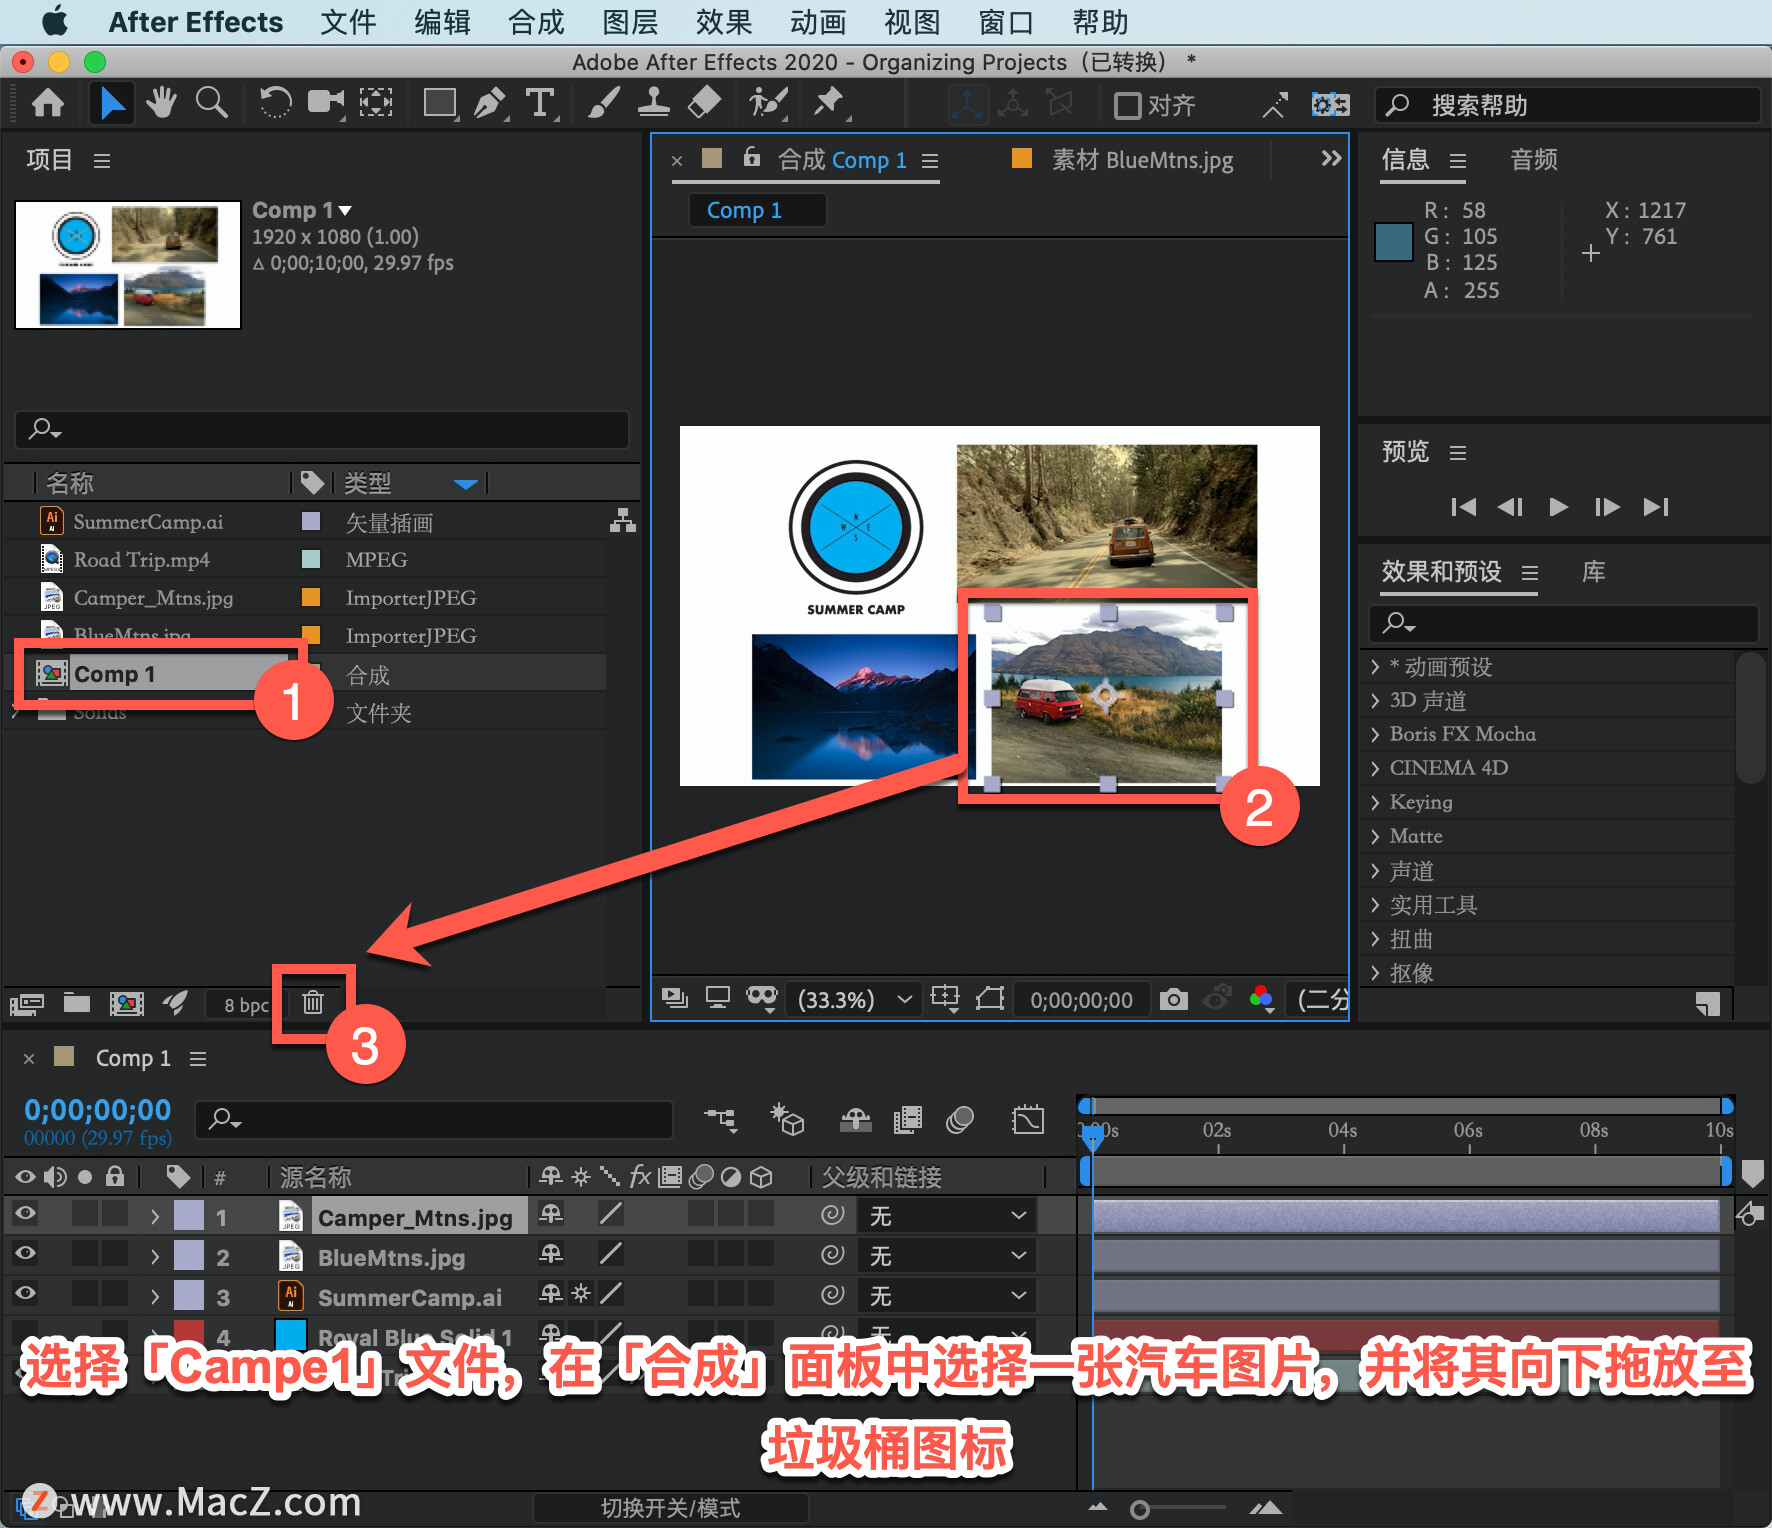 After Effects ̡̳4 After Effects Ŀ